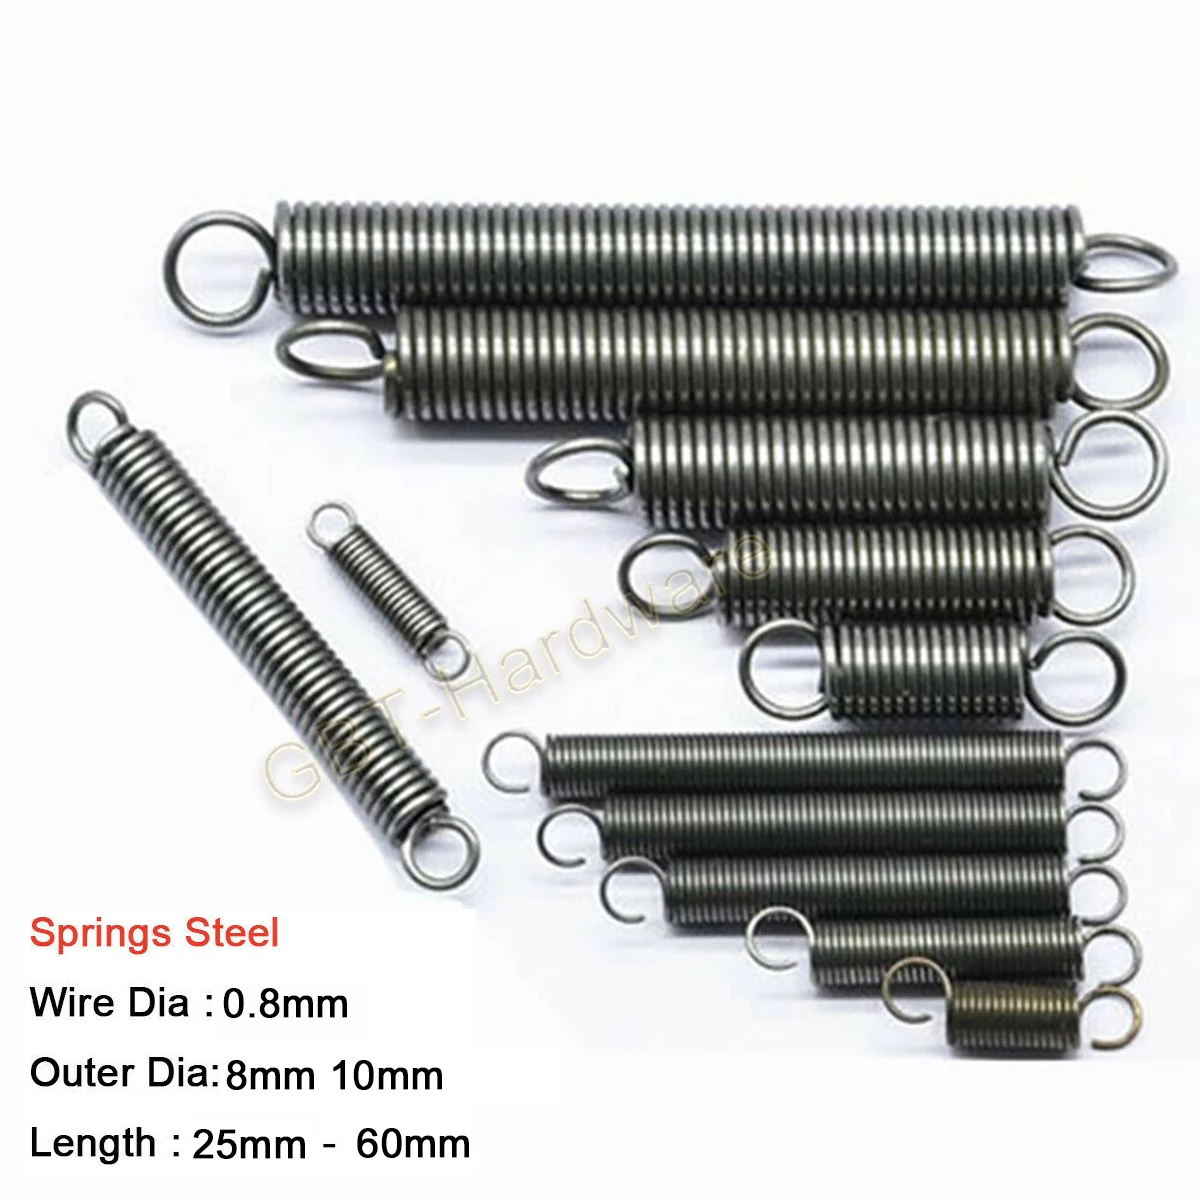 no logo Extension Springs 10Pcs Small Extension Spring Steel Wire Diameter 0.6mm Tension Spring with Hooks Outer Diameter 7mm Length 15-60mm Multipurpose Size : 0.6 x 7 x 15mm